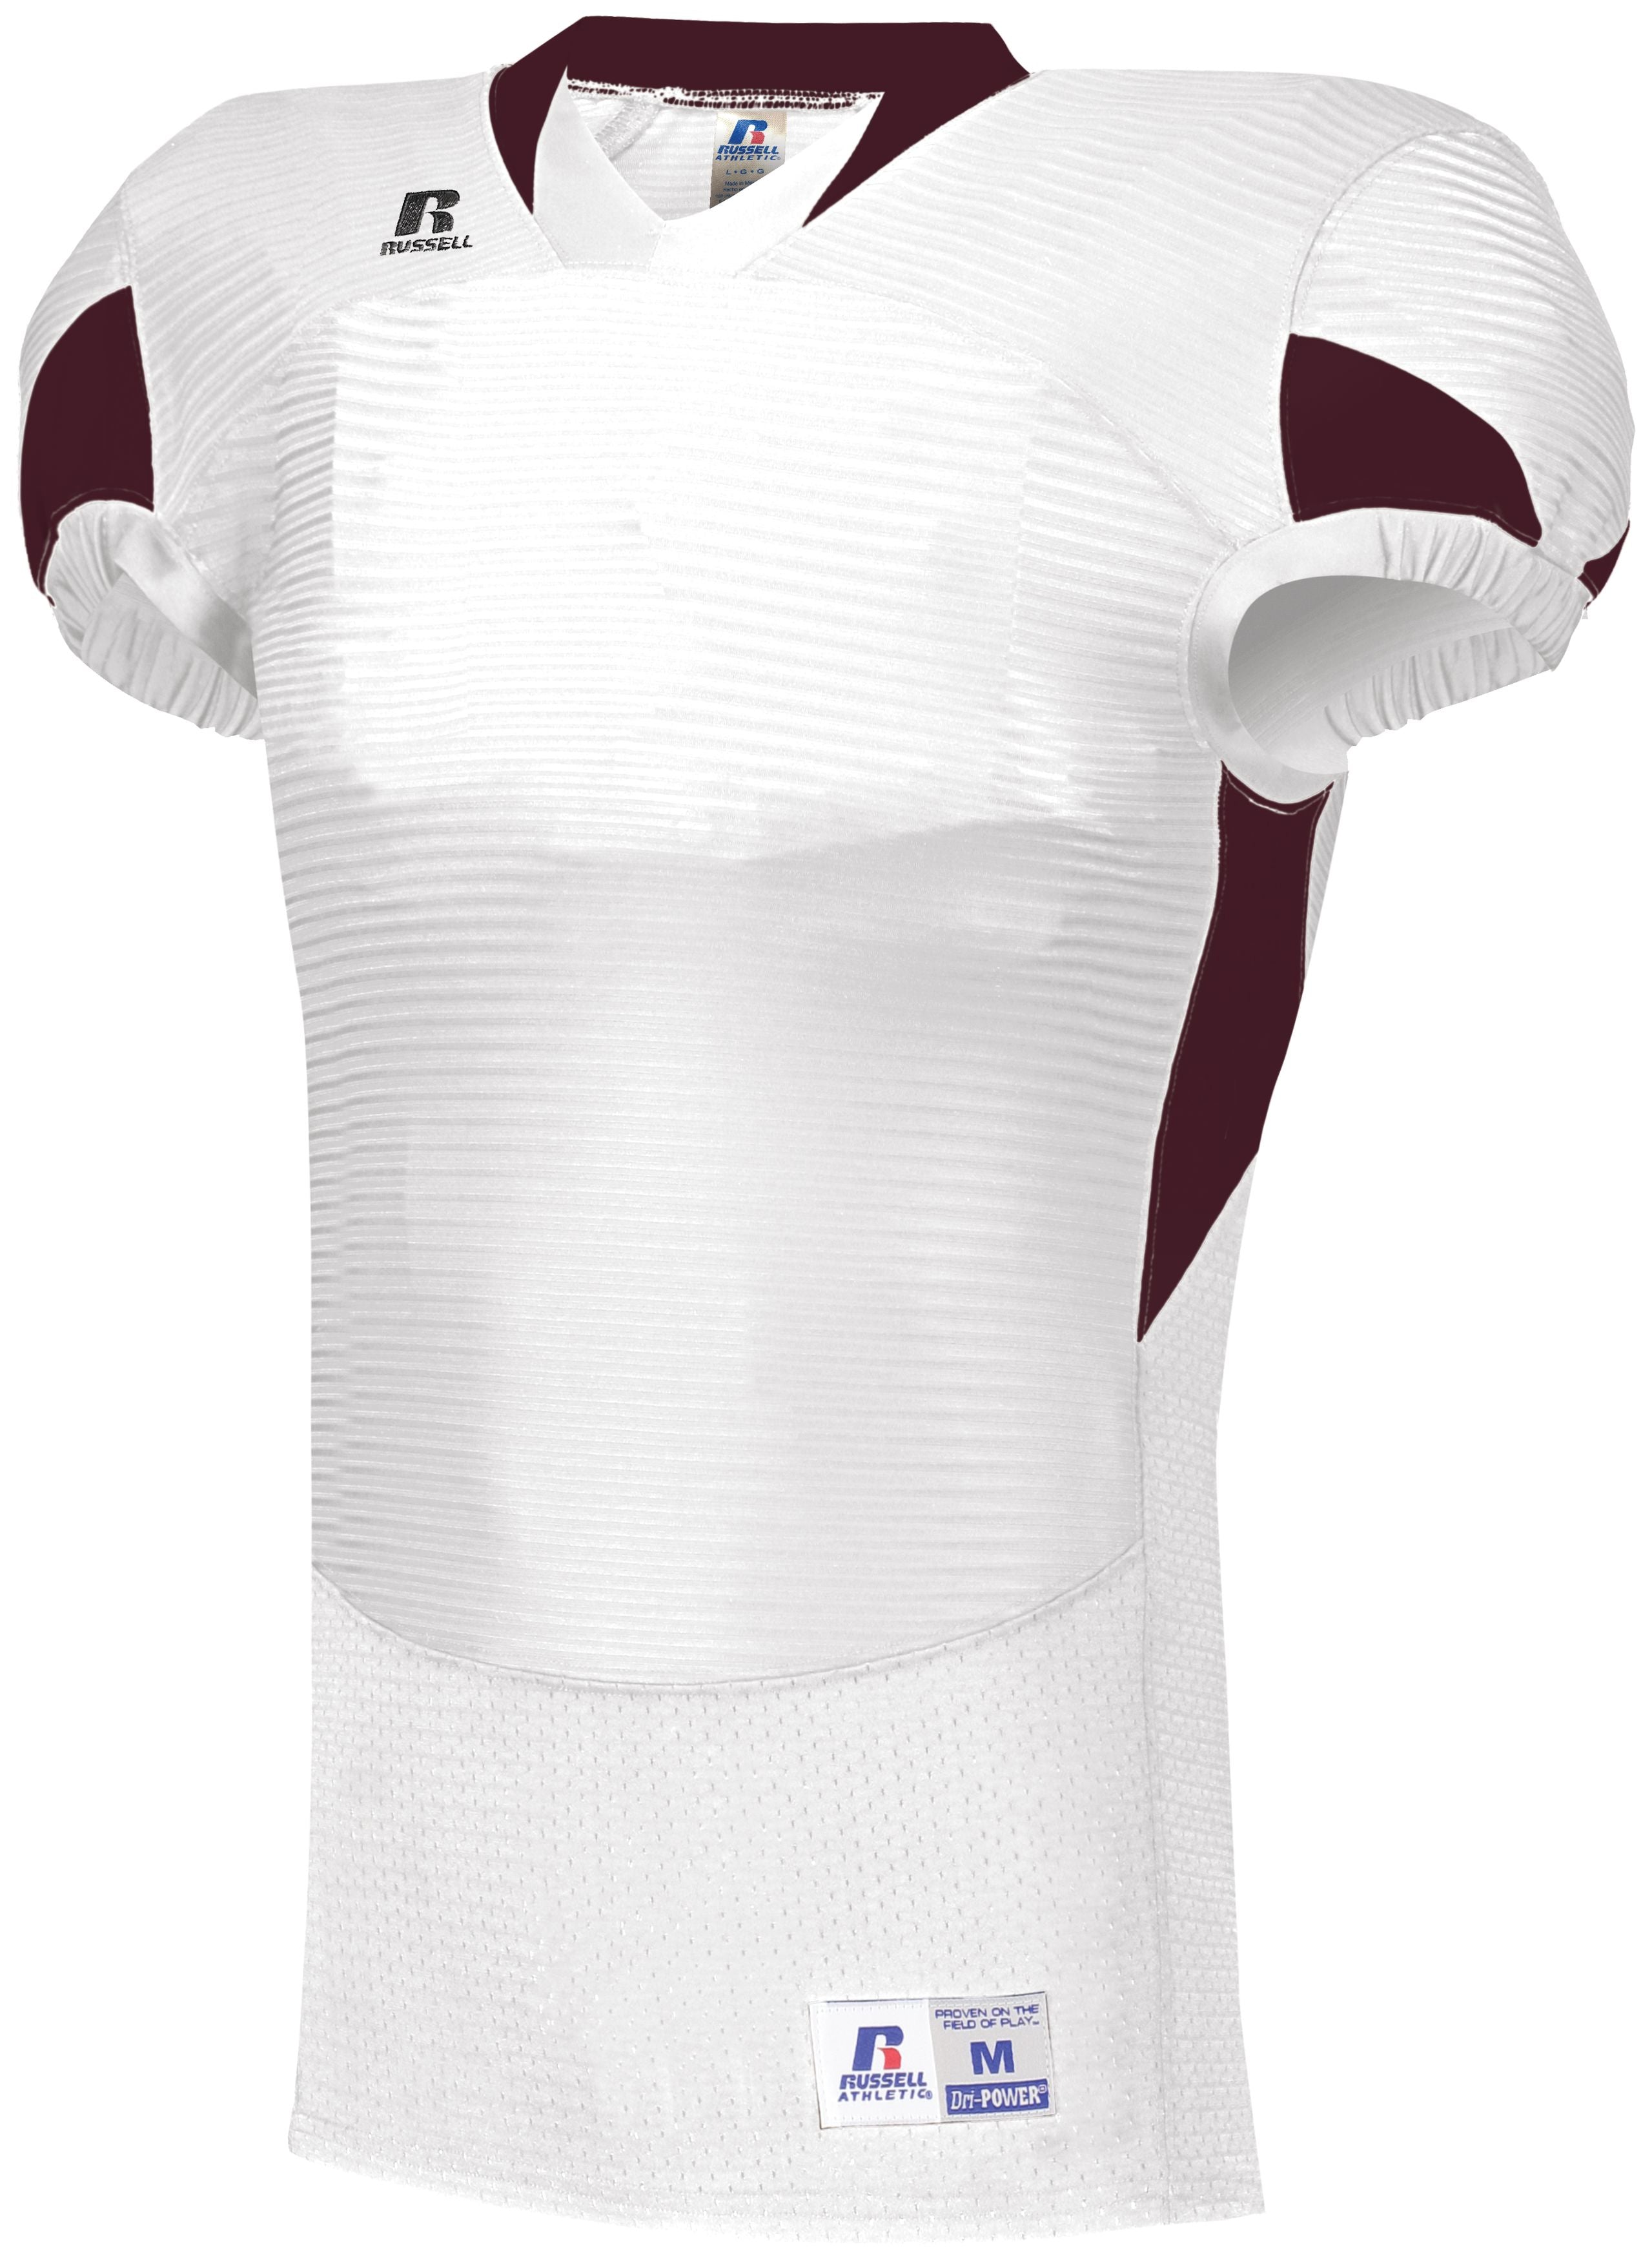 Russell Athletic Waist Length Football Jersey in White/Maroon  -Part of the Adult, Adult-Jersey, Football, Russell-Athletic-Products, Shirts, All-Sports, All-Sports-1 product lines at KanaleyCreations.com